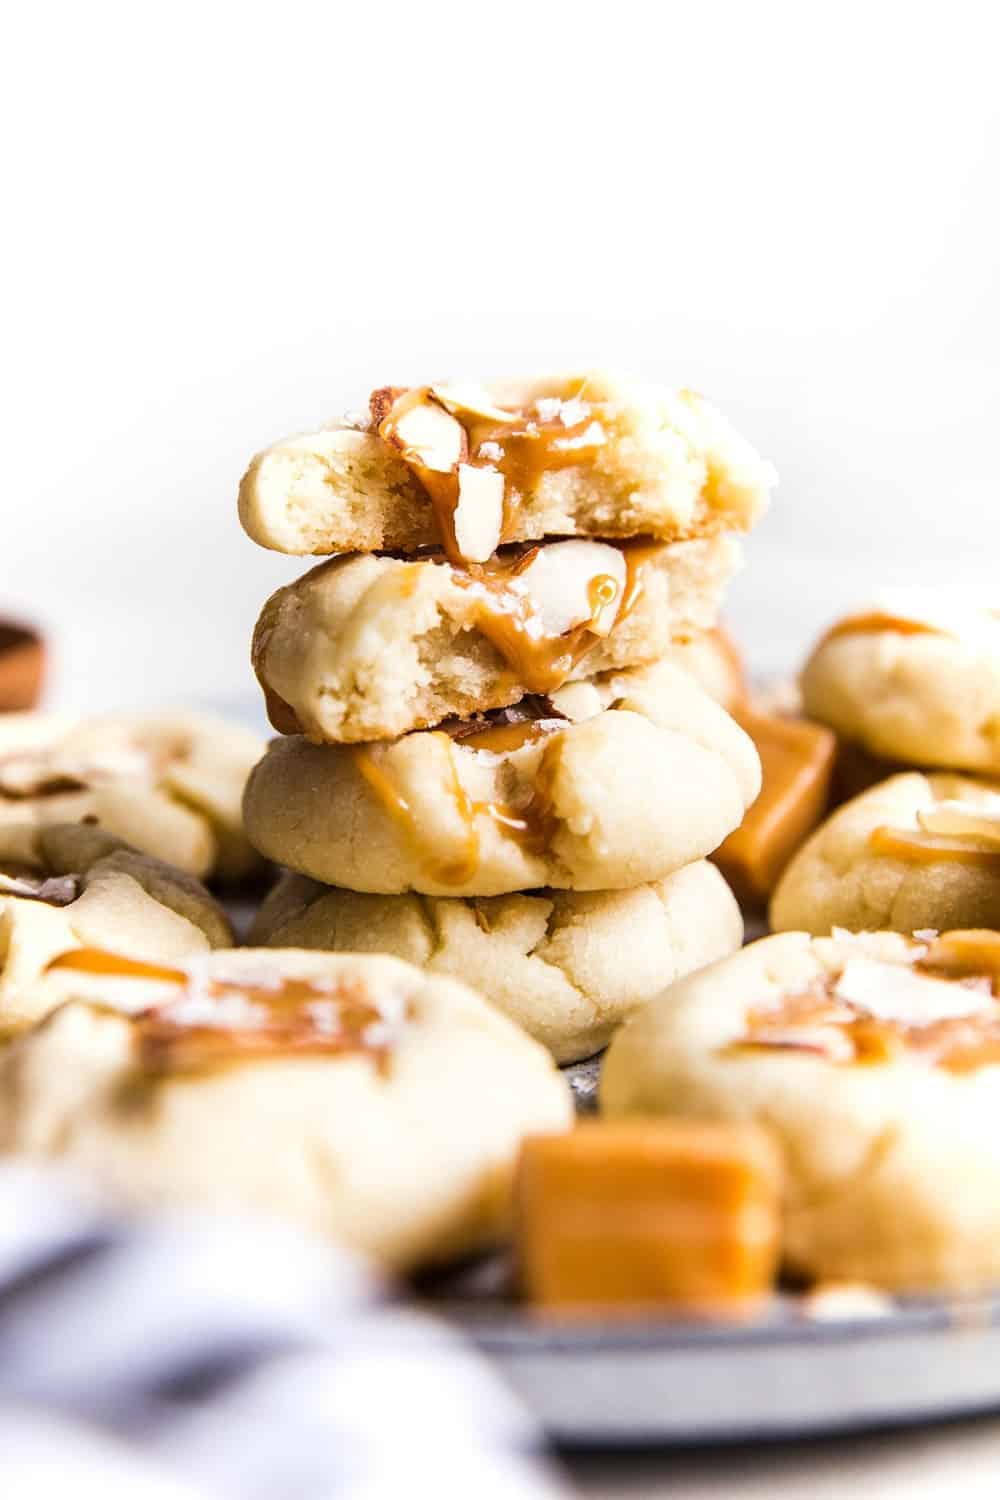 Almond thumbprint cookies with a salted caramel center